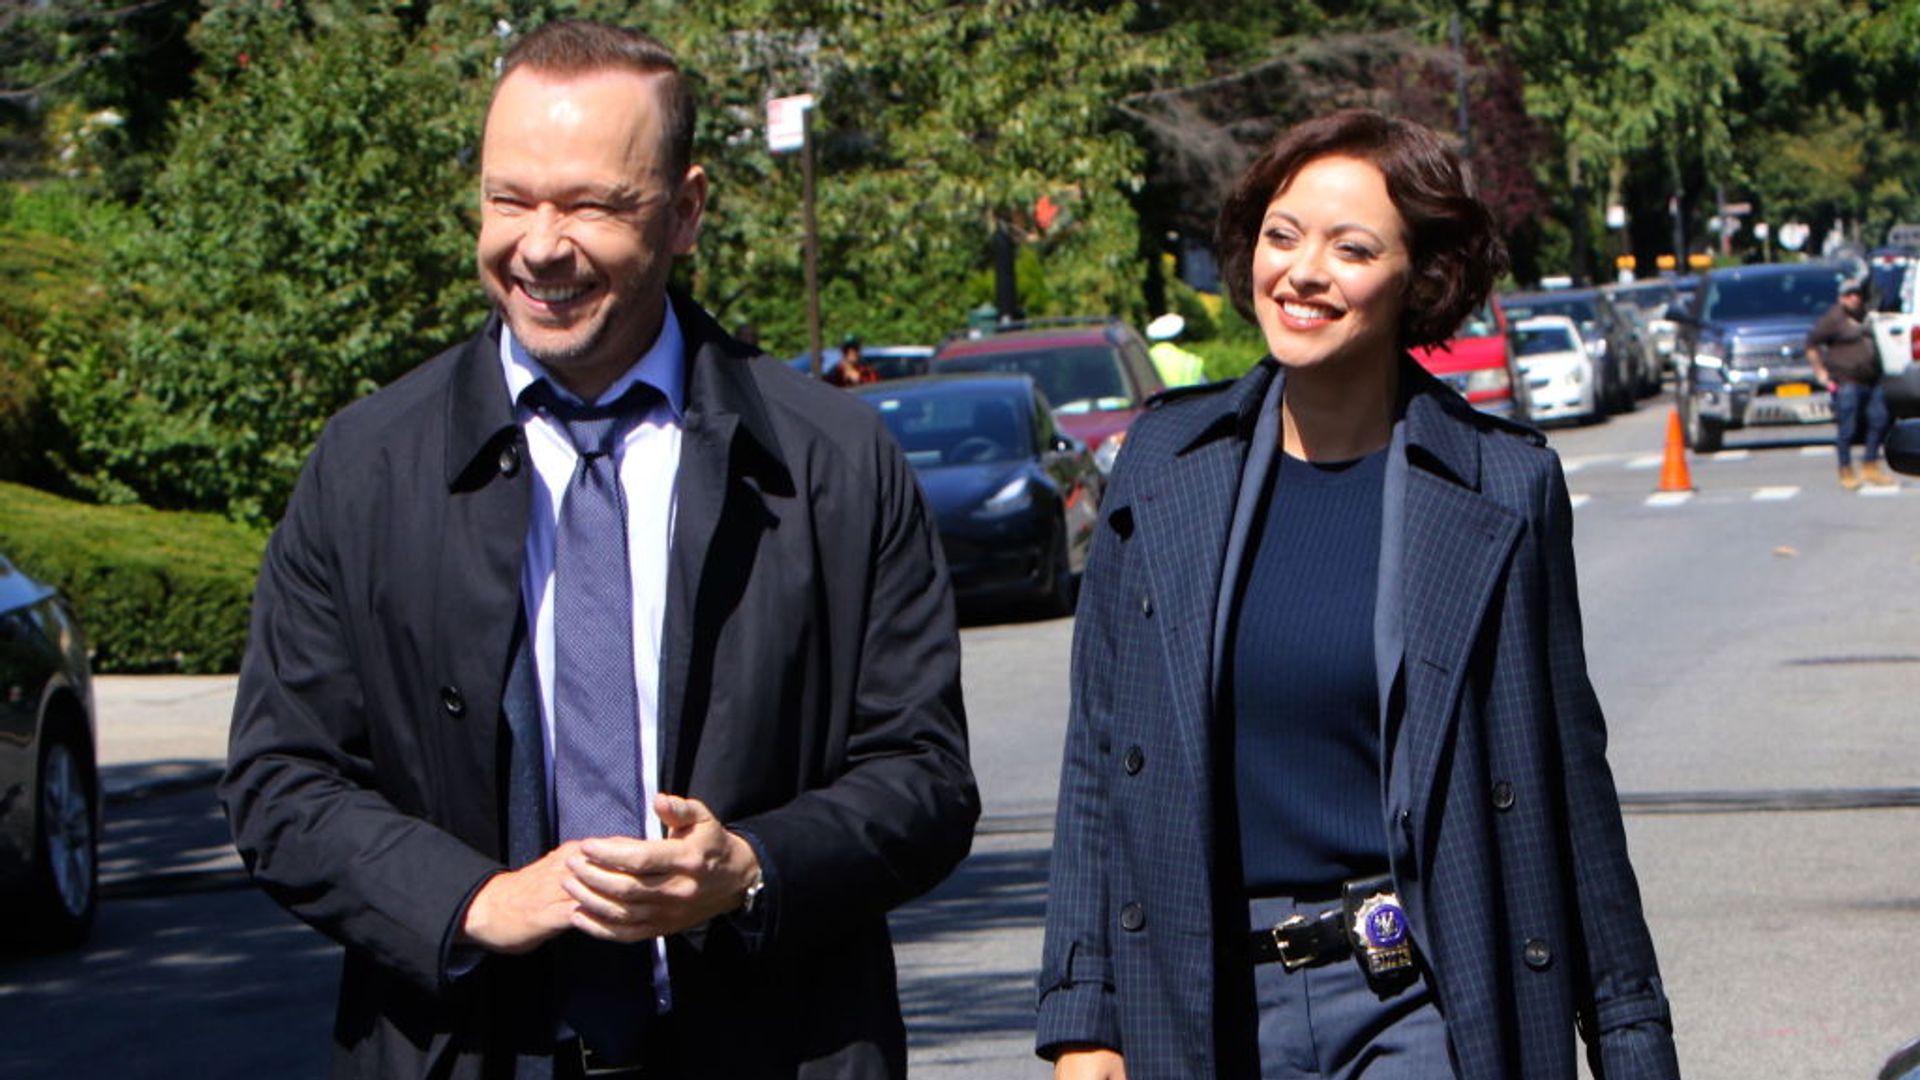 Donnie Wahlberg and Marisa Ramirez are seen on the set of "Blue Bloods" on September 19, 2019 in New York City